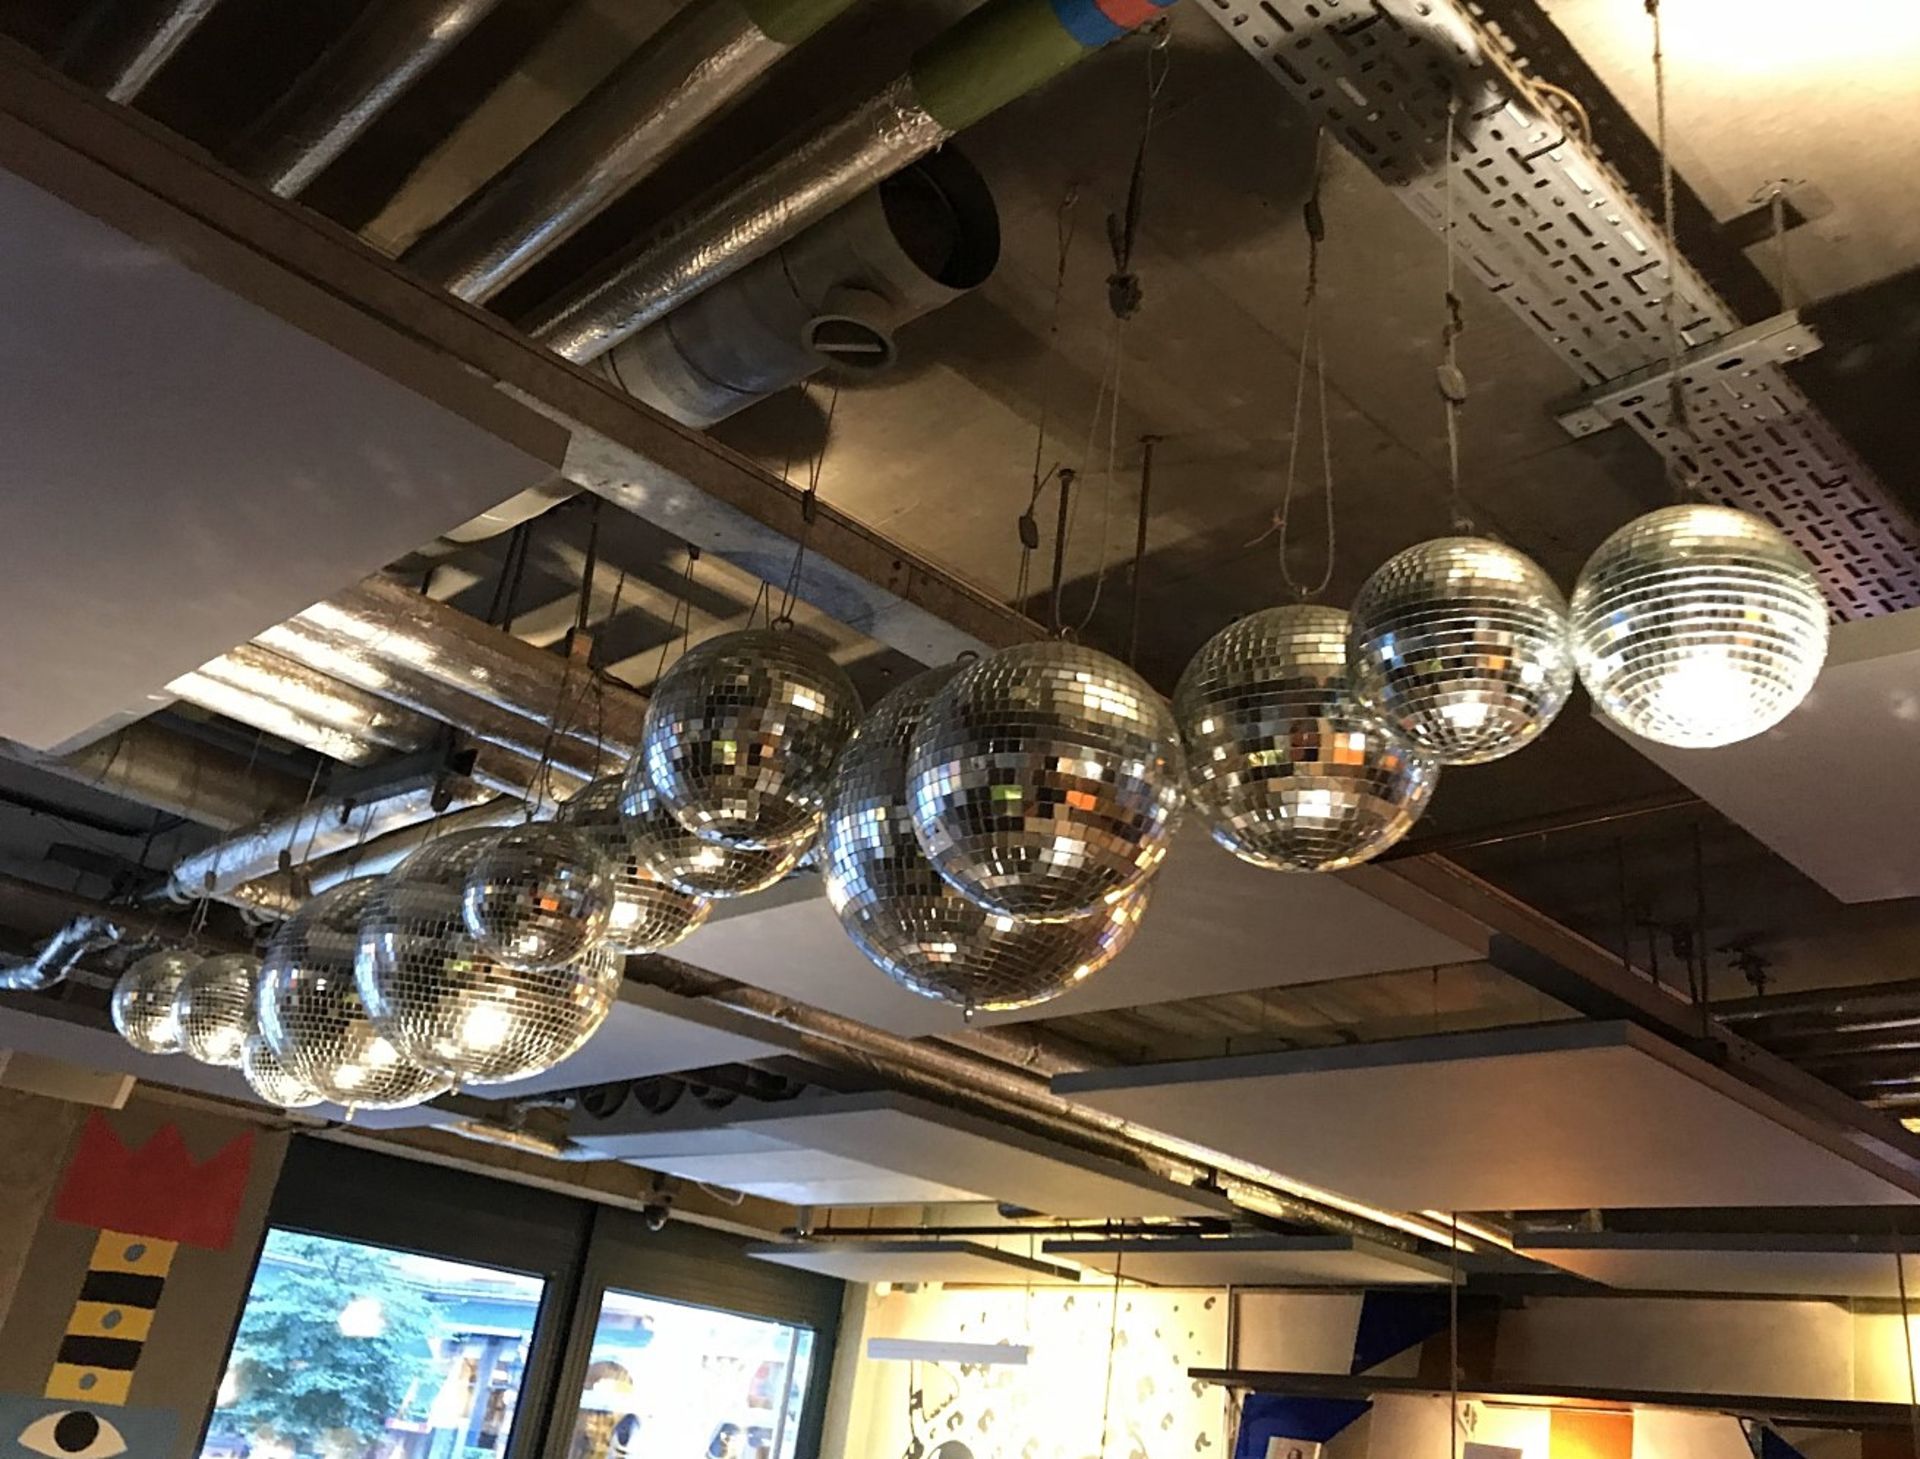 15 x Mirrored Disco Balls - Sizes Range From Small to Large - CL554 - Ref IM272 - Location: London - Image 2 of 3